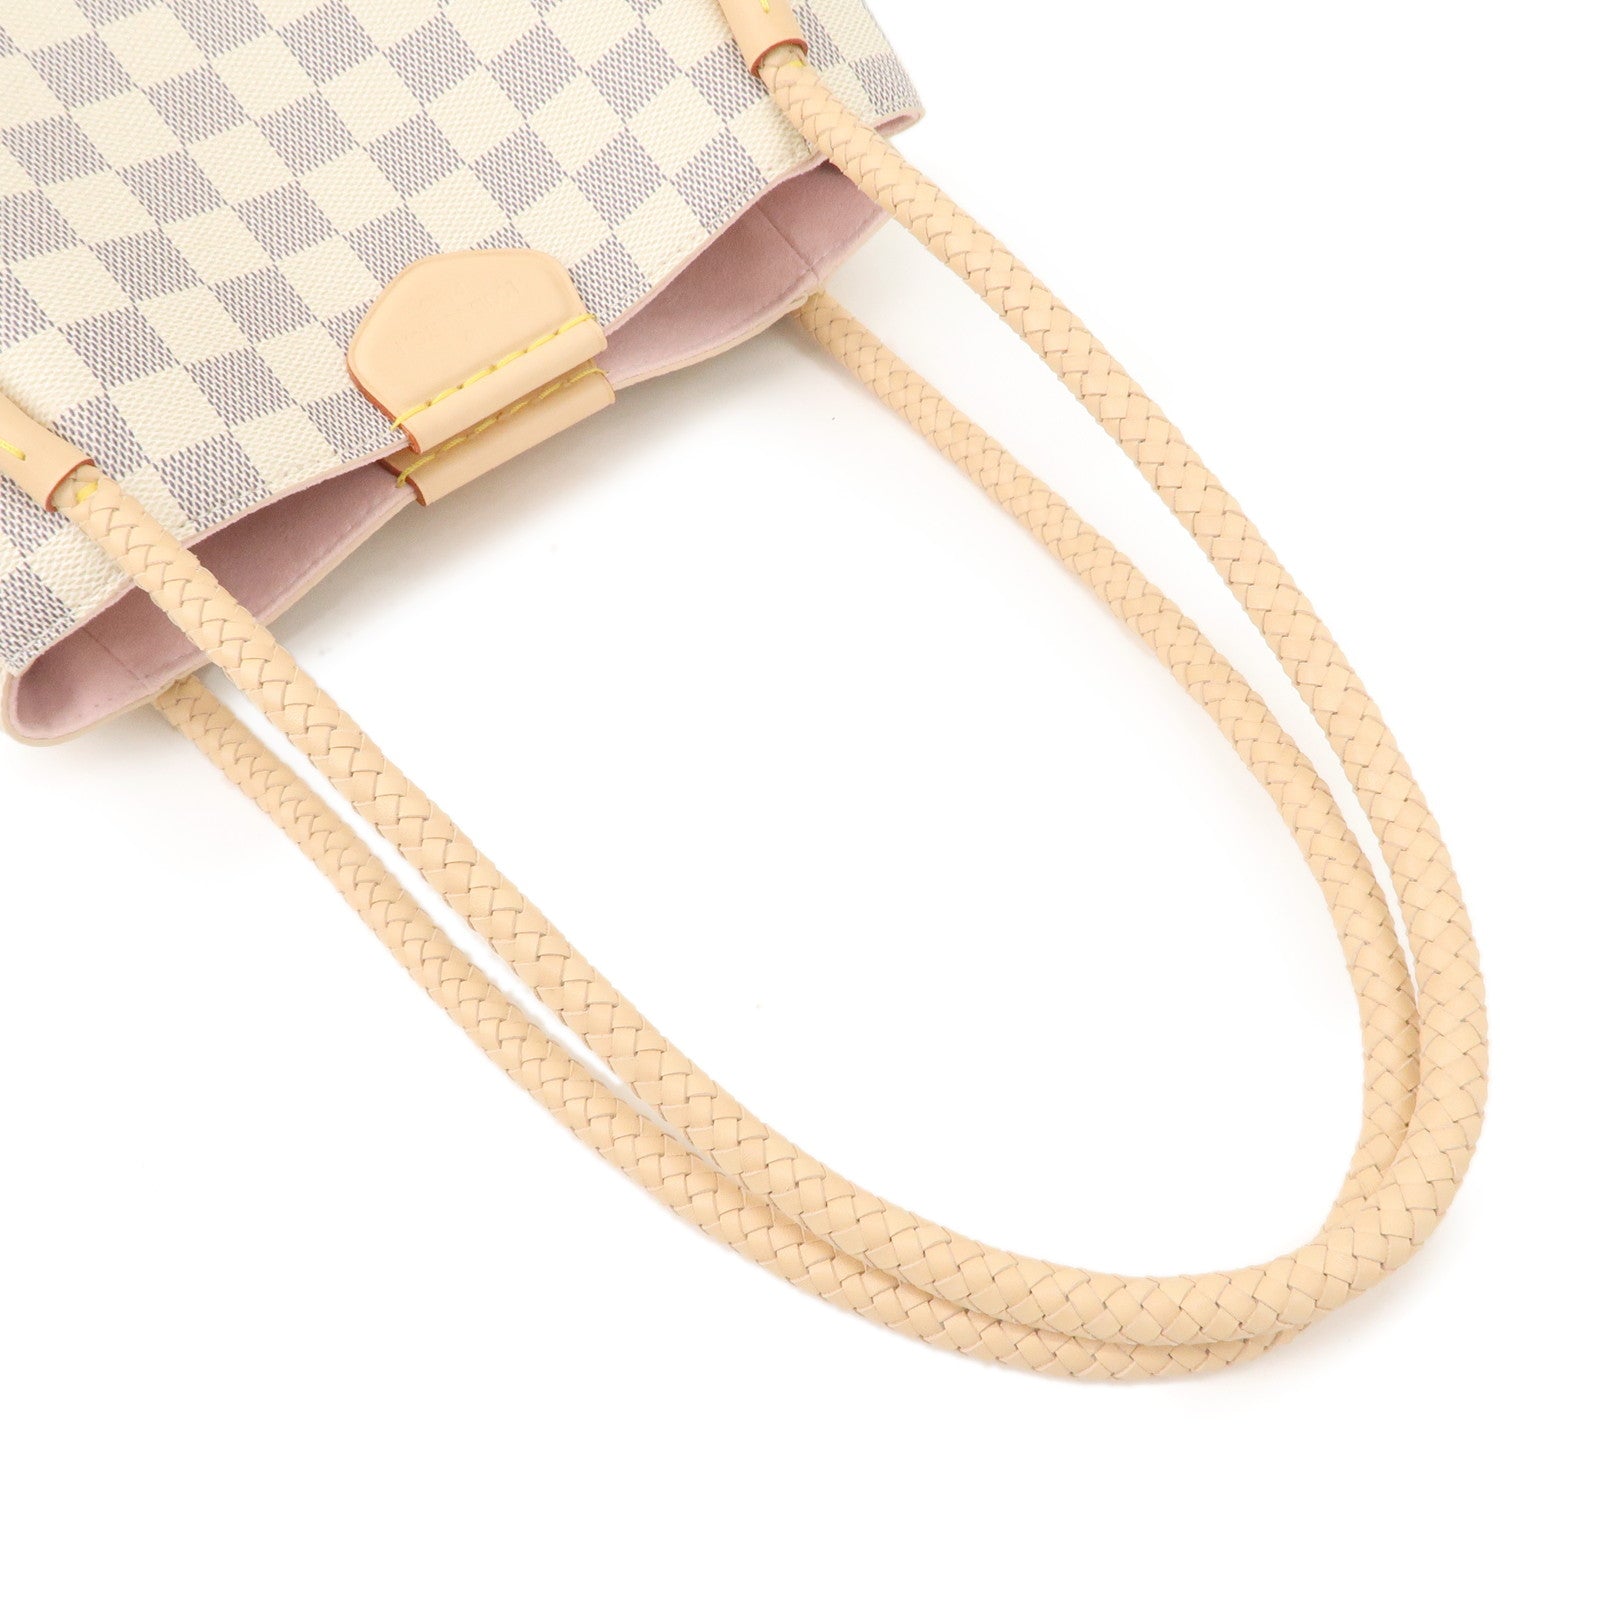 Louis Vuitton Bags With Pink Inside